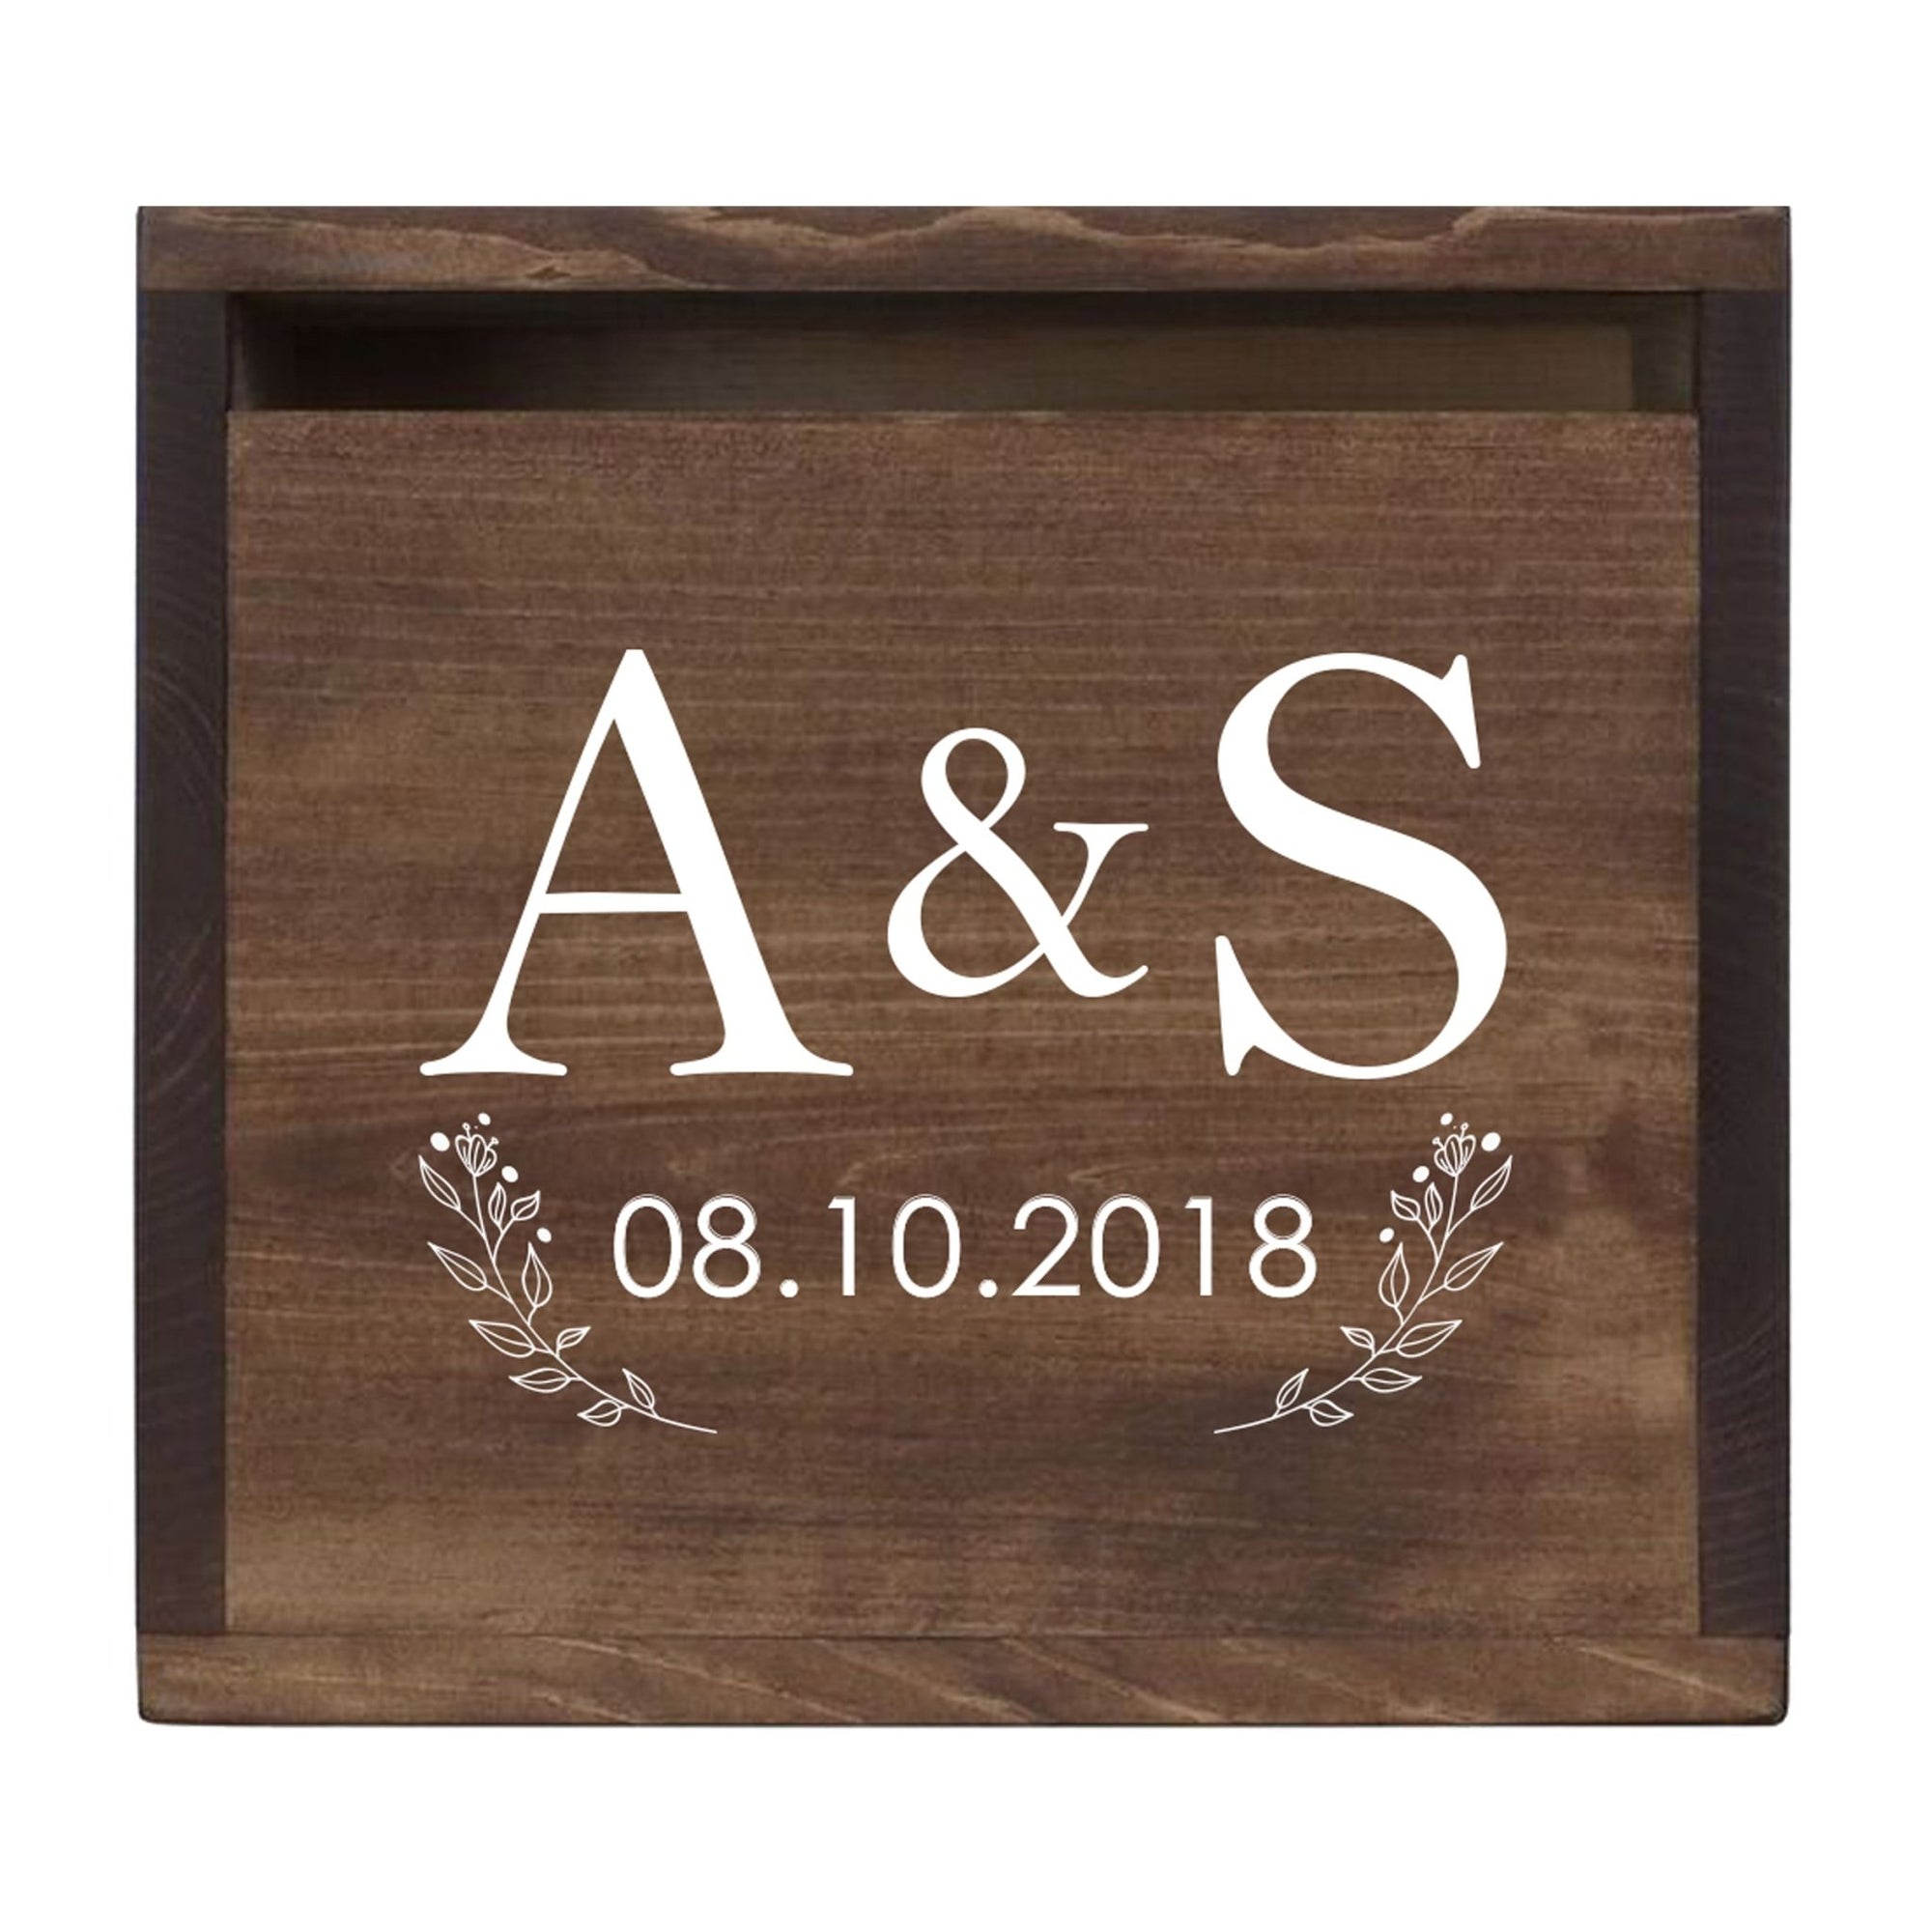 Personalized Wooden Card Box for Wedding Ceremonies, Venues, Receptions, Bridal Showers, and Engagement Parties 13.5x12 - A&S (Flowers) - LifeSong Milestones